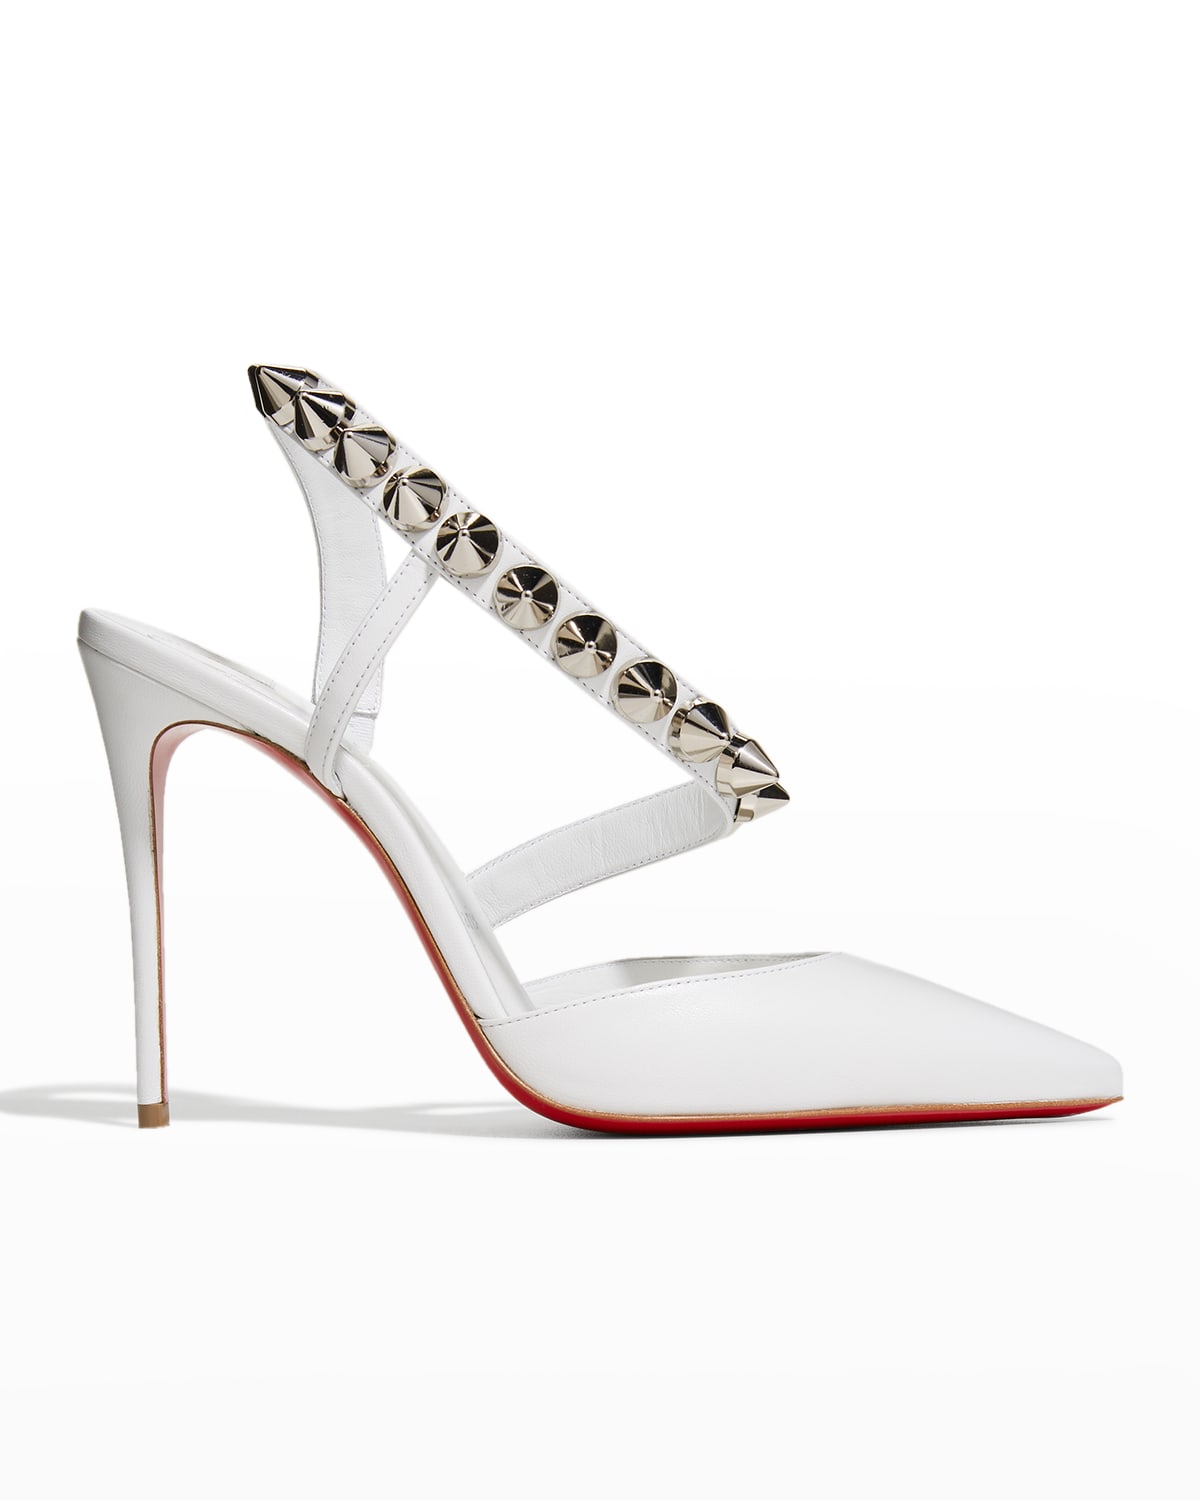 Christian Louboutin Spikita Red Sole Spiked Stiletto Pumps